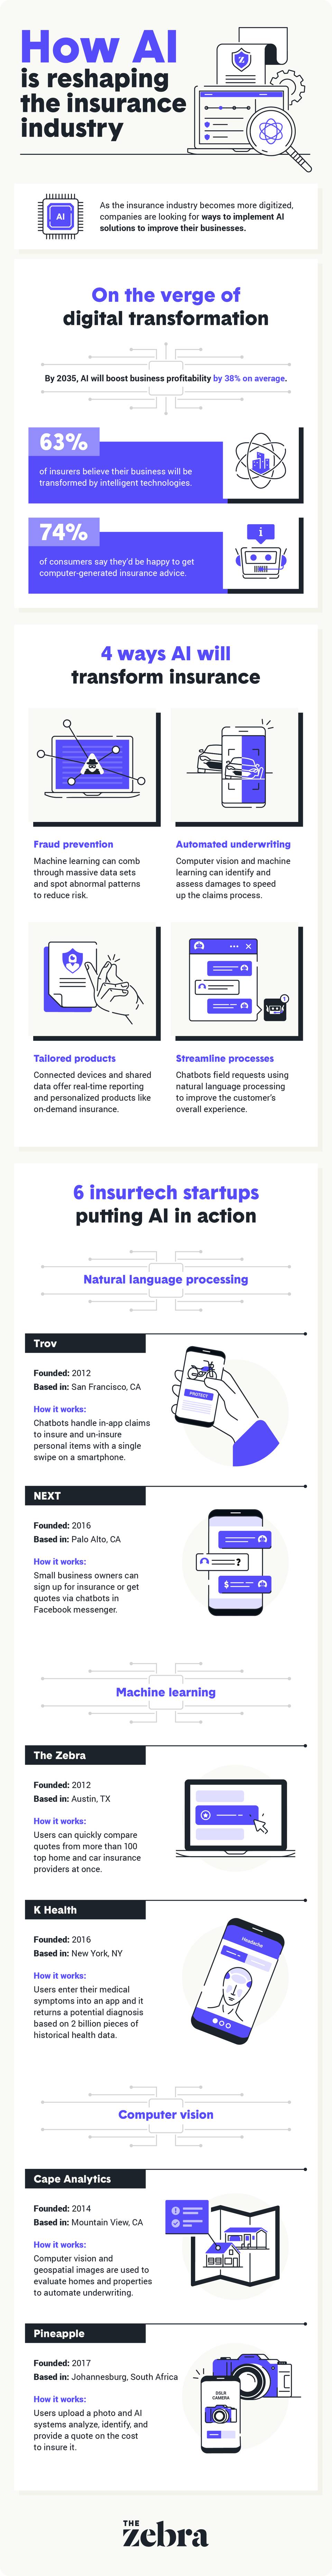 Infographic describing benefits of implementing AI solutions